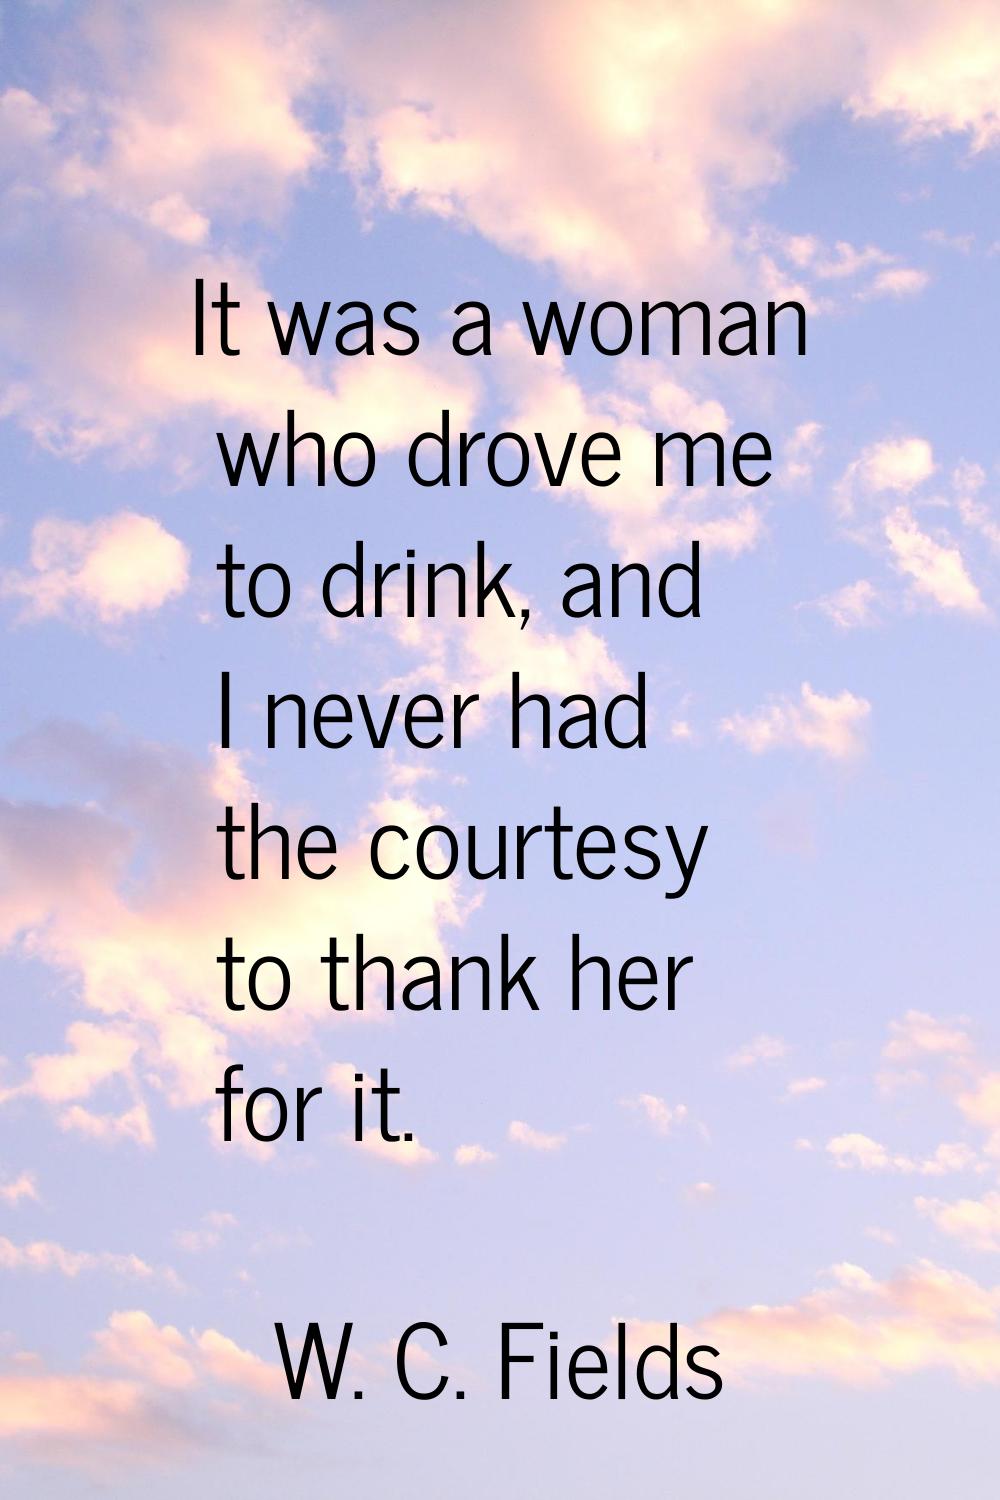 It was a woman who drove me to drink, and I never had the courtesy to thank her for it.